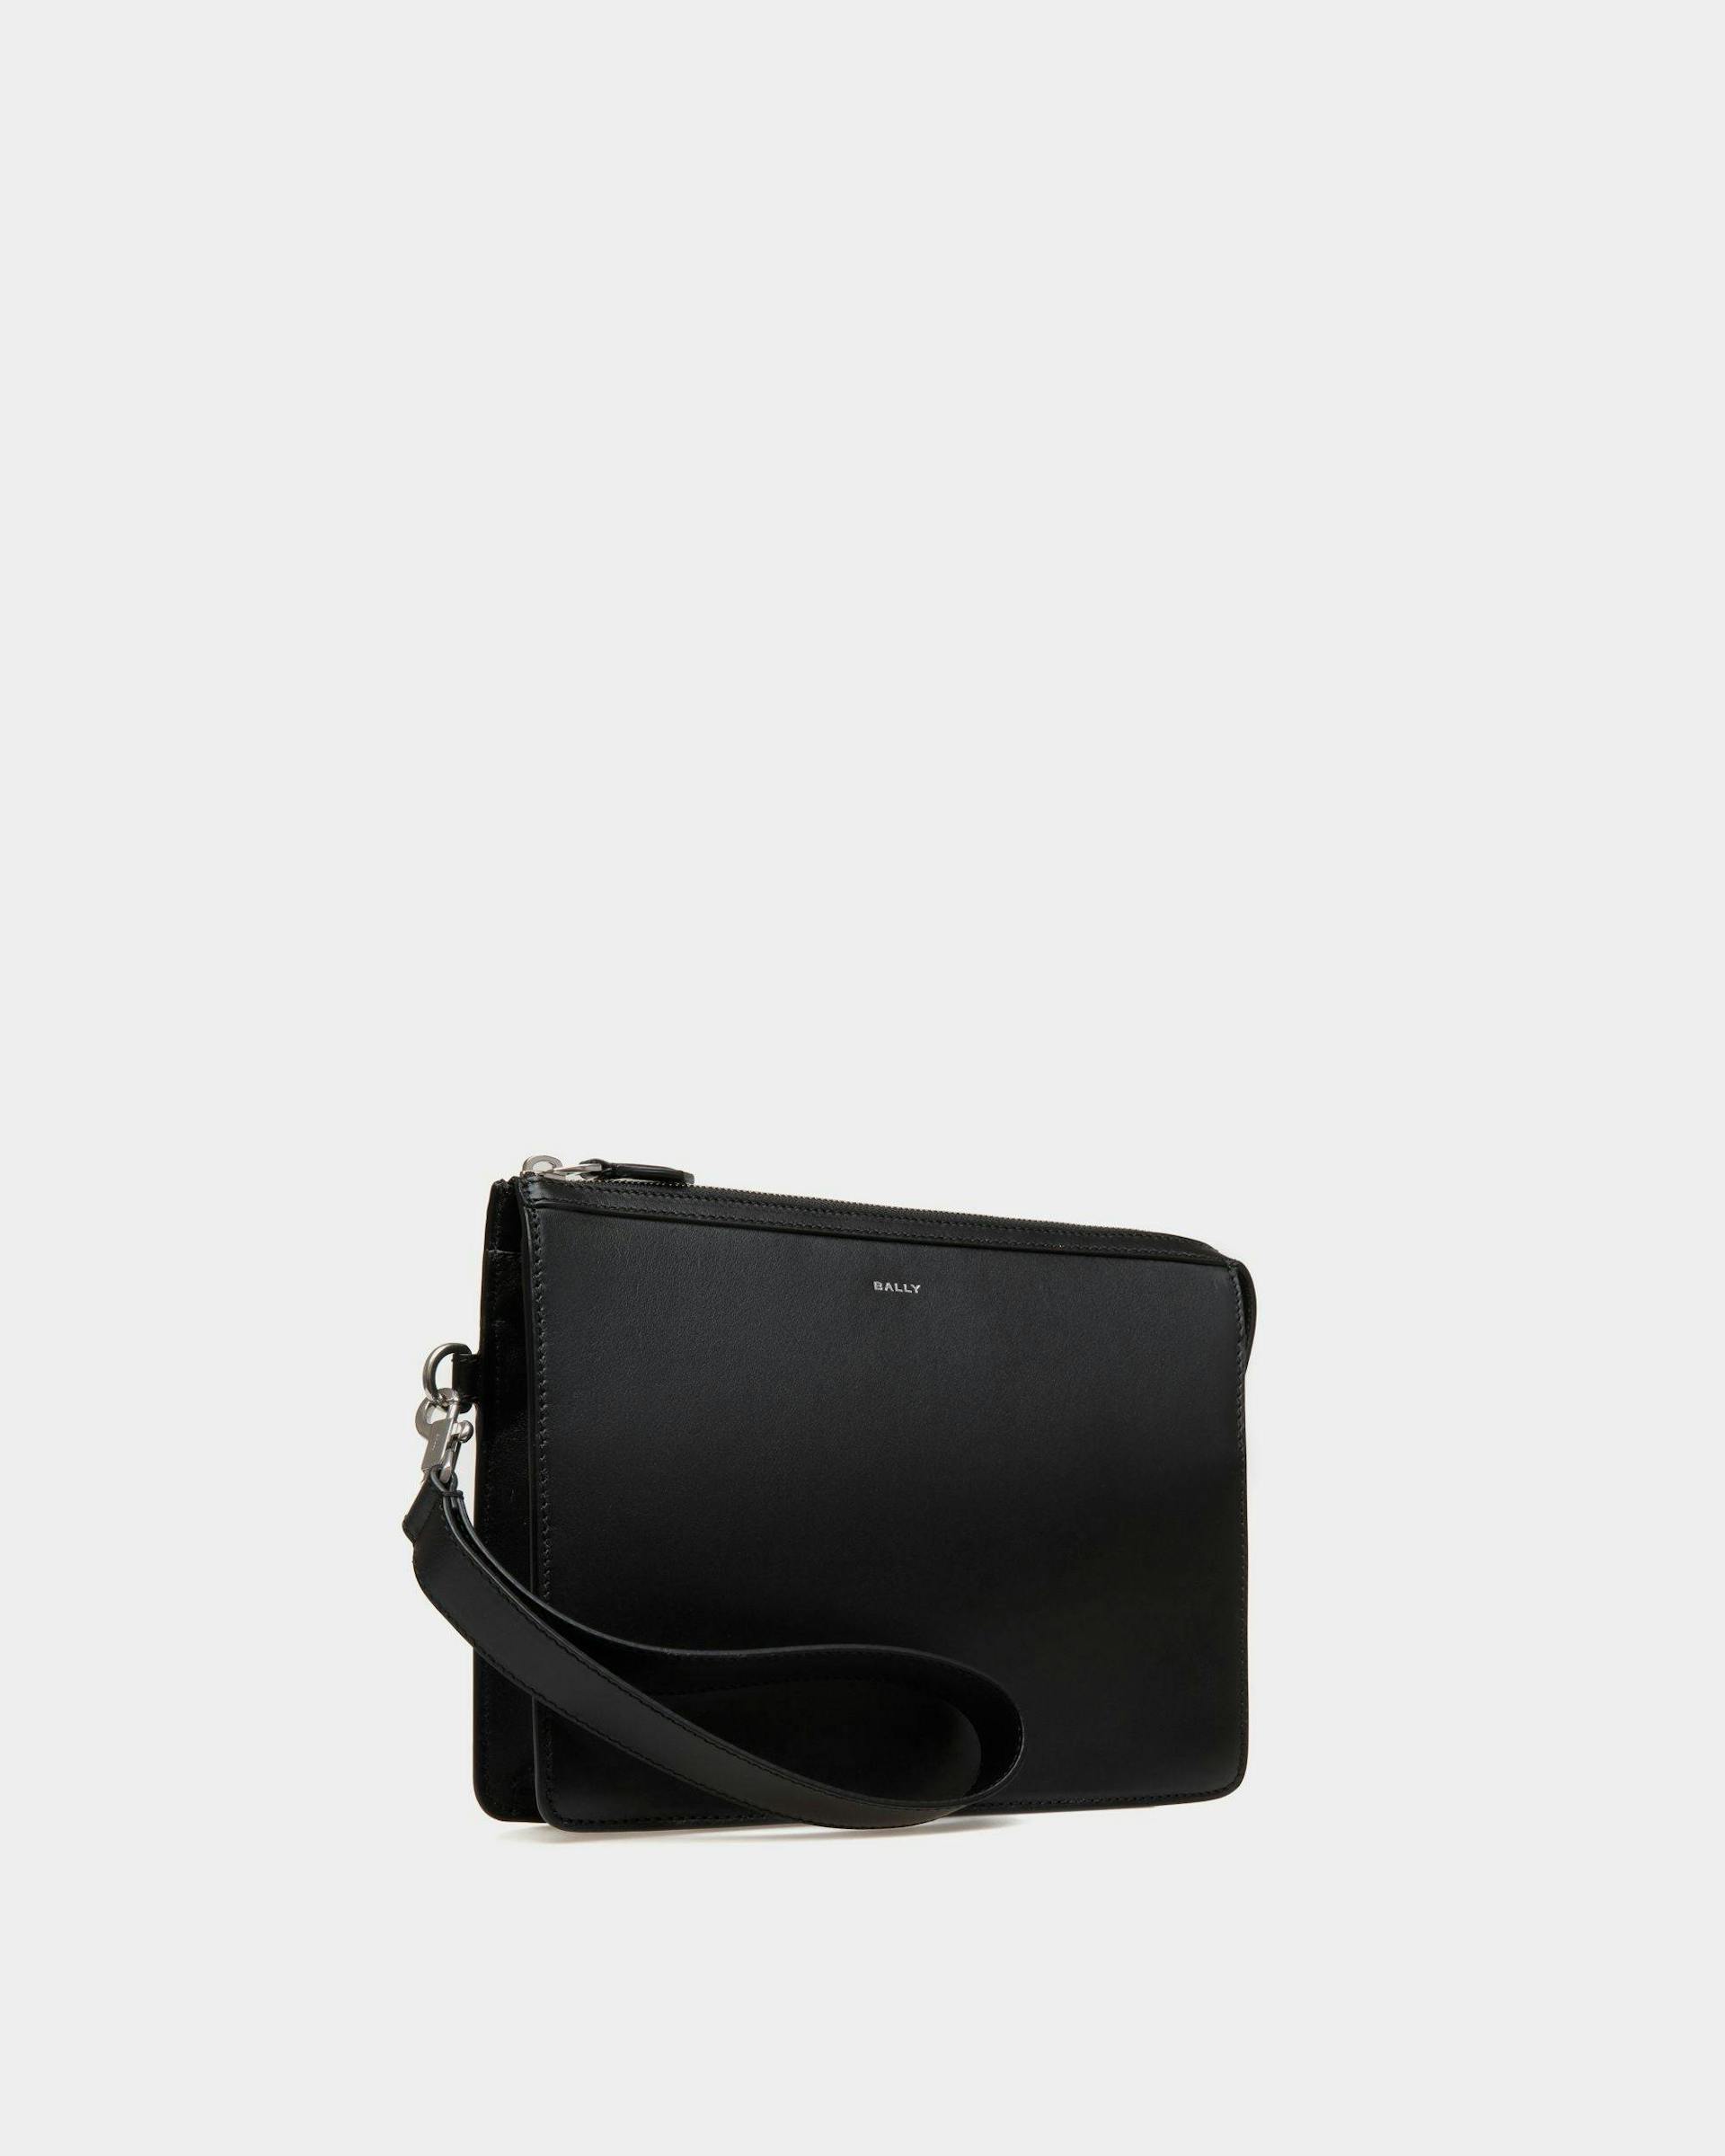 Men's Busy Bally Pouch in Black Leather | Bally | Still Life 3/4 Front